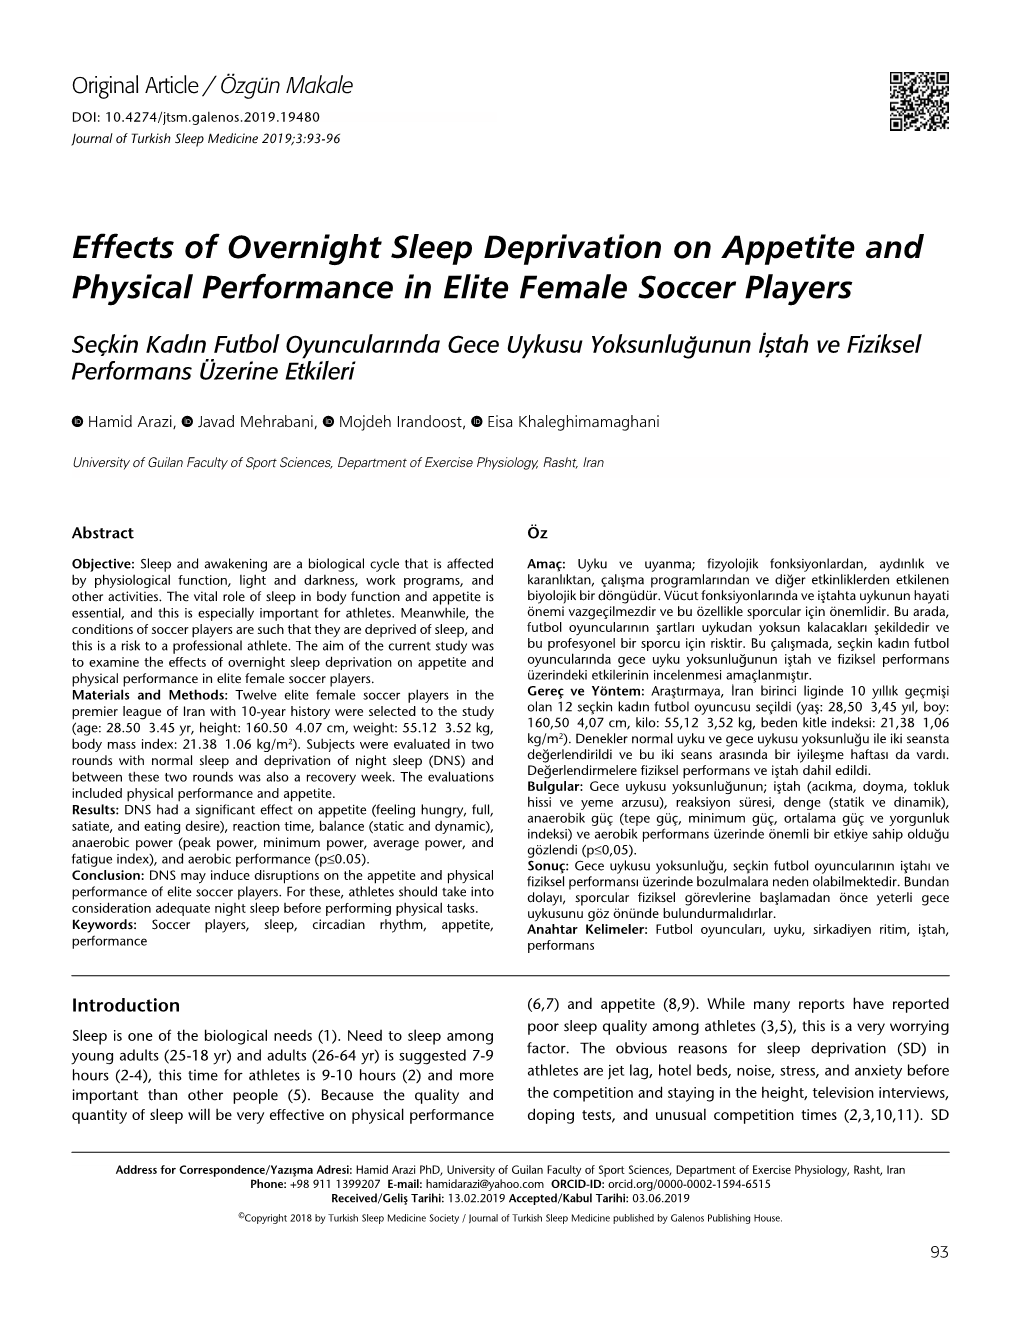 Effects of Overnight Sleep Deprivation on Appetite and Physical Performance in Elite Female Soccer Players